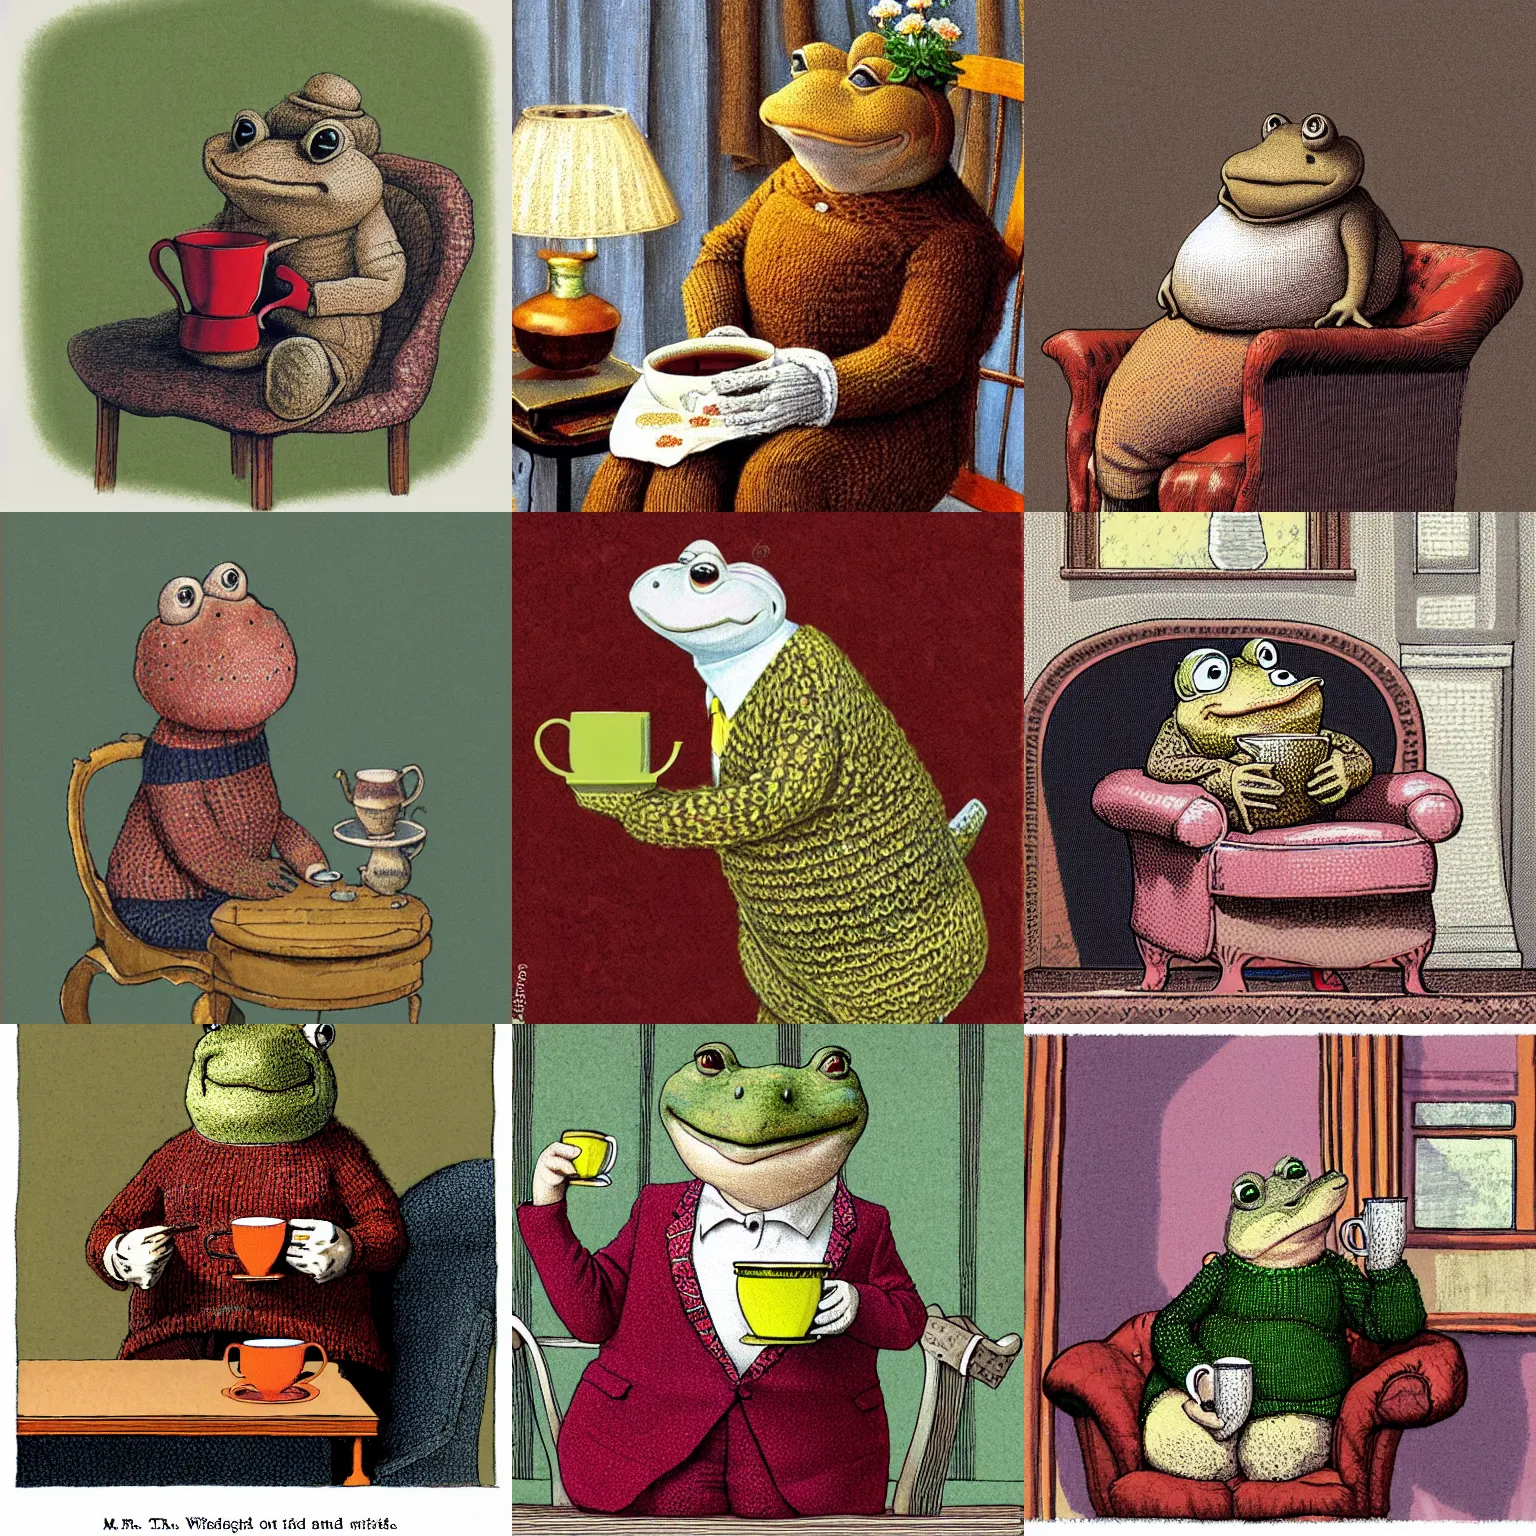 Prompt: Mr toad sipping a cup of tea while wearing a knit sweater and sitting in an armchair. Illustration by James Gurney